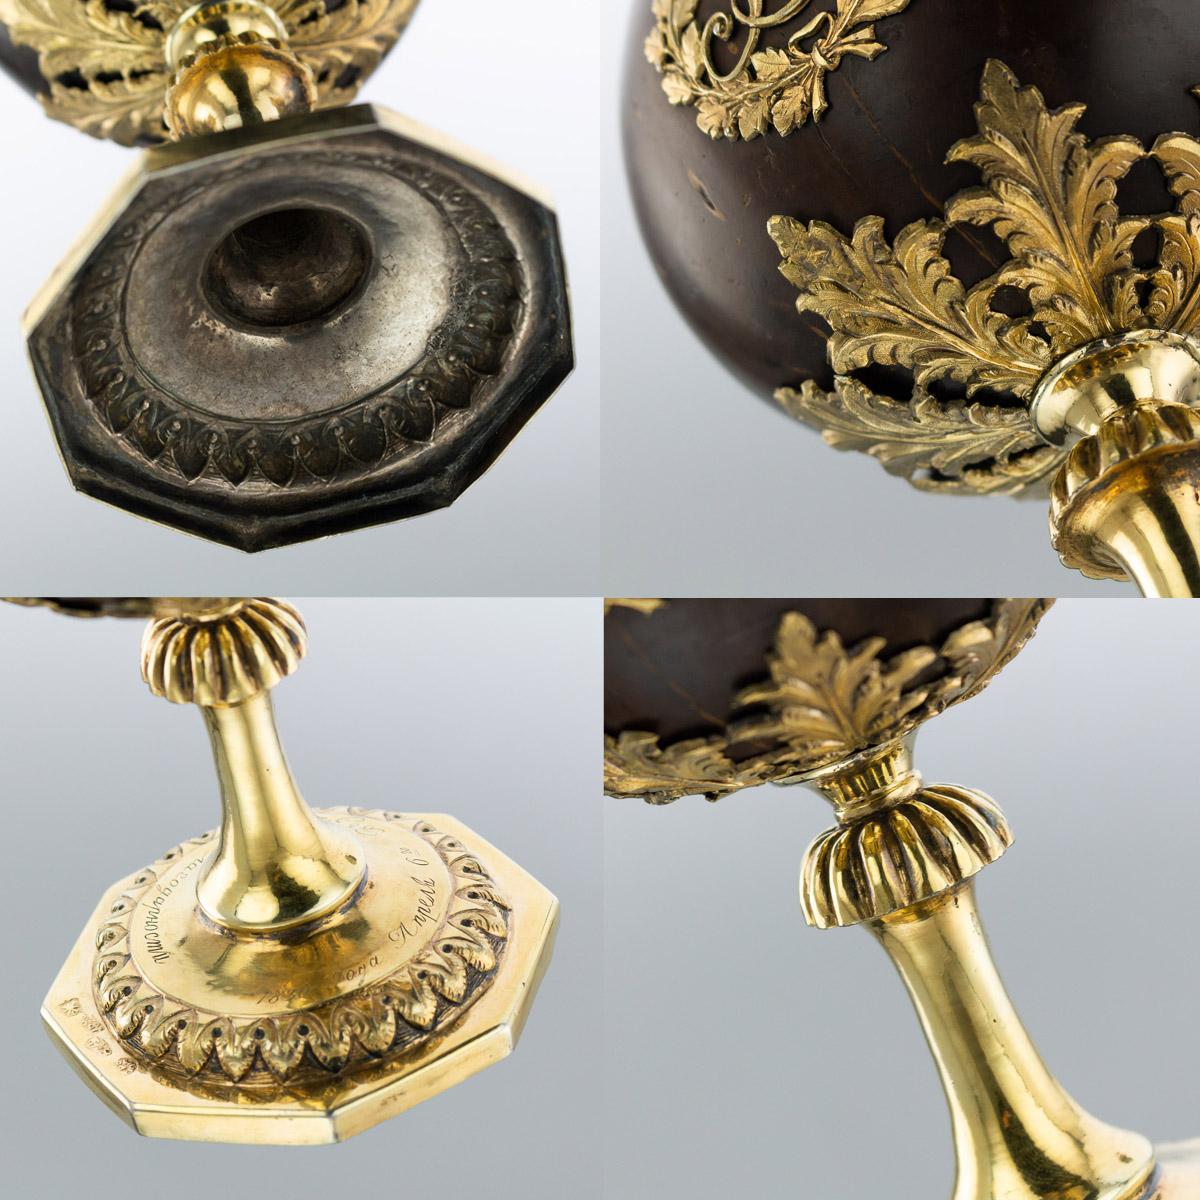 Antique Russian Silver-Gilt Mounted Coconut Lidded Cup, Tula, circa 1825 6